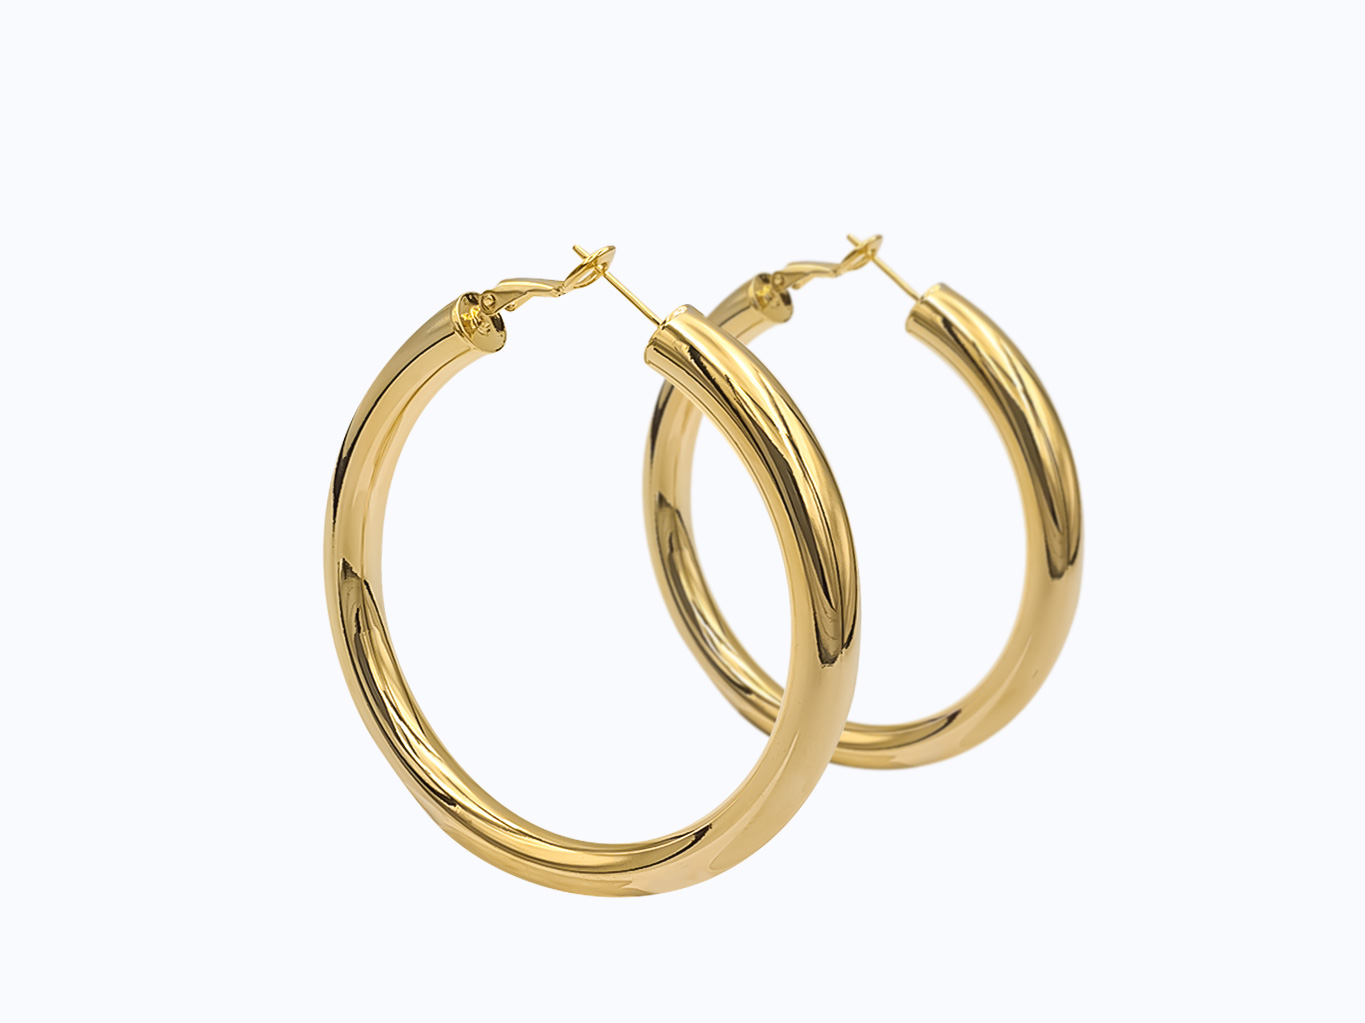 Gold Plated Thick Hoop Earrings 6cm - Adema